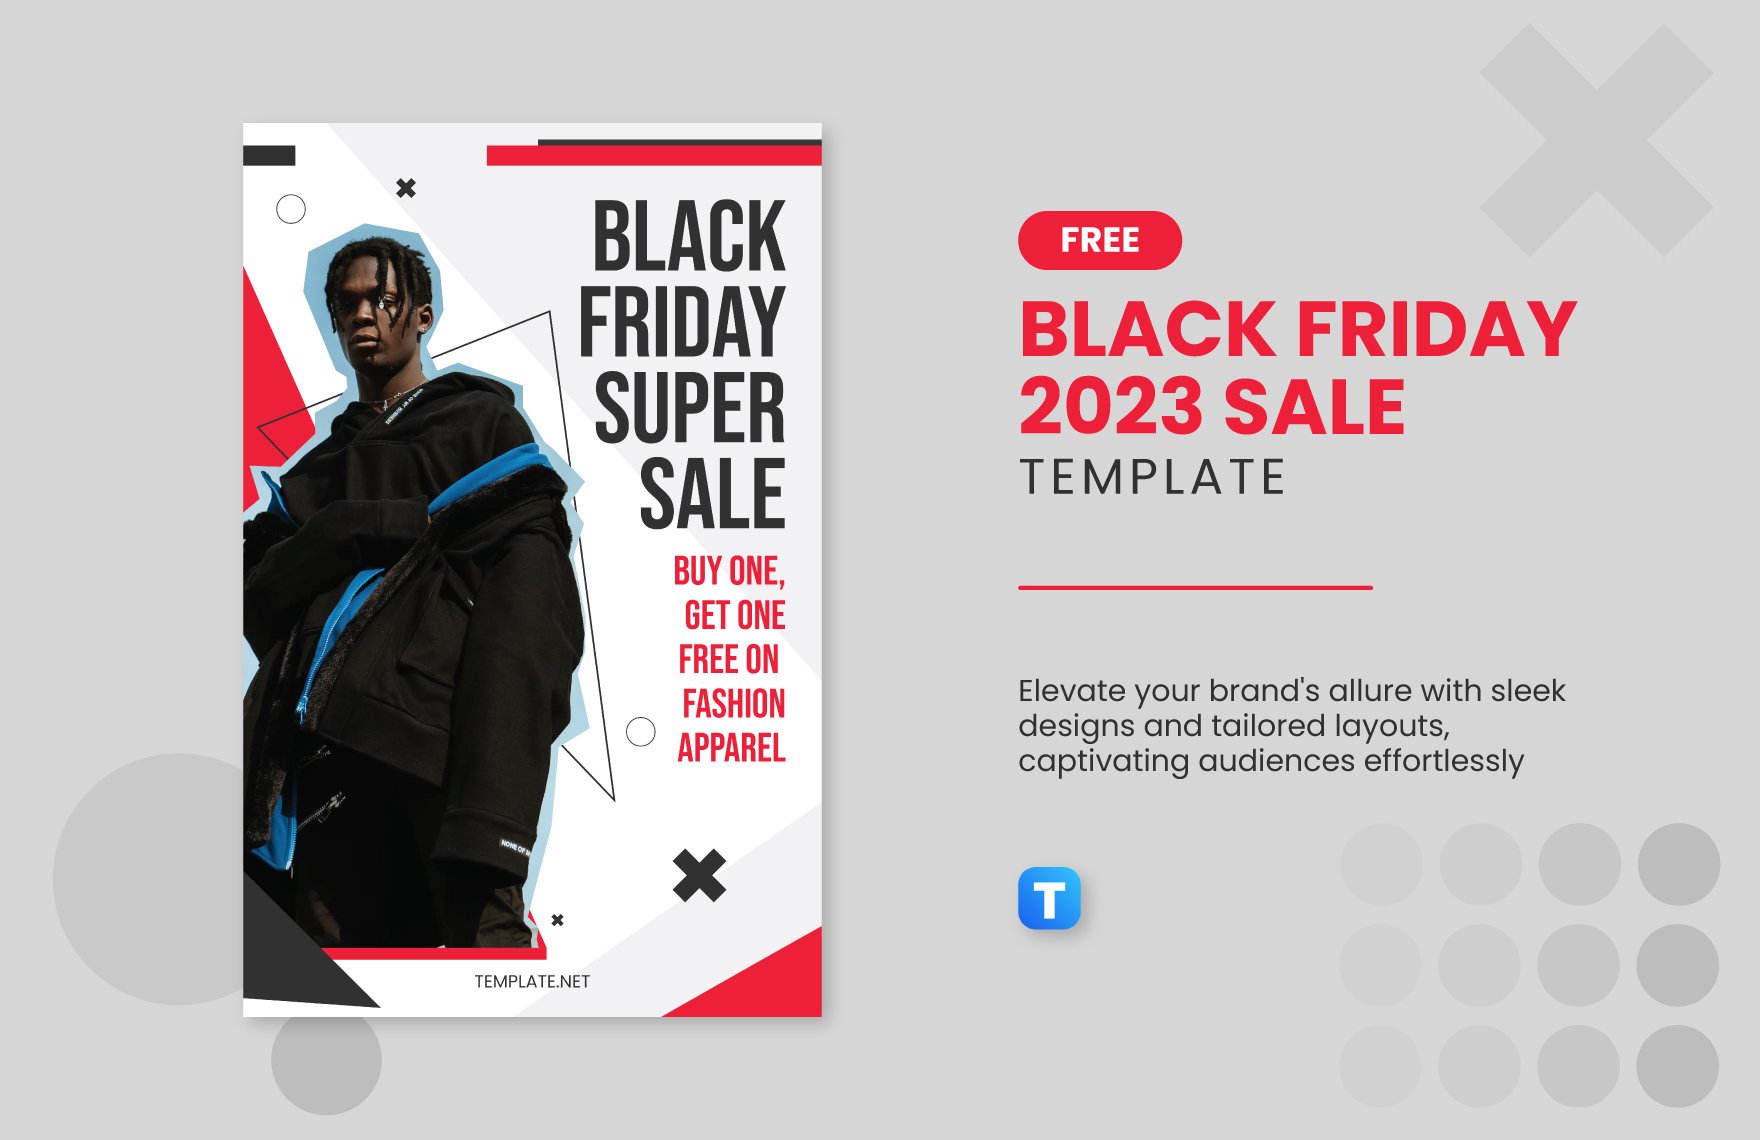 Free Black Friday 2023 Sale Template